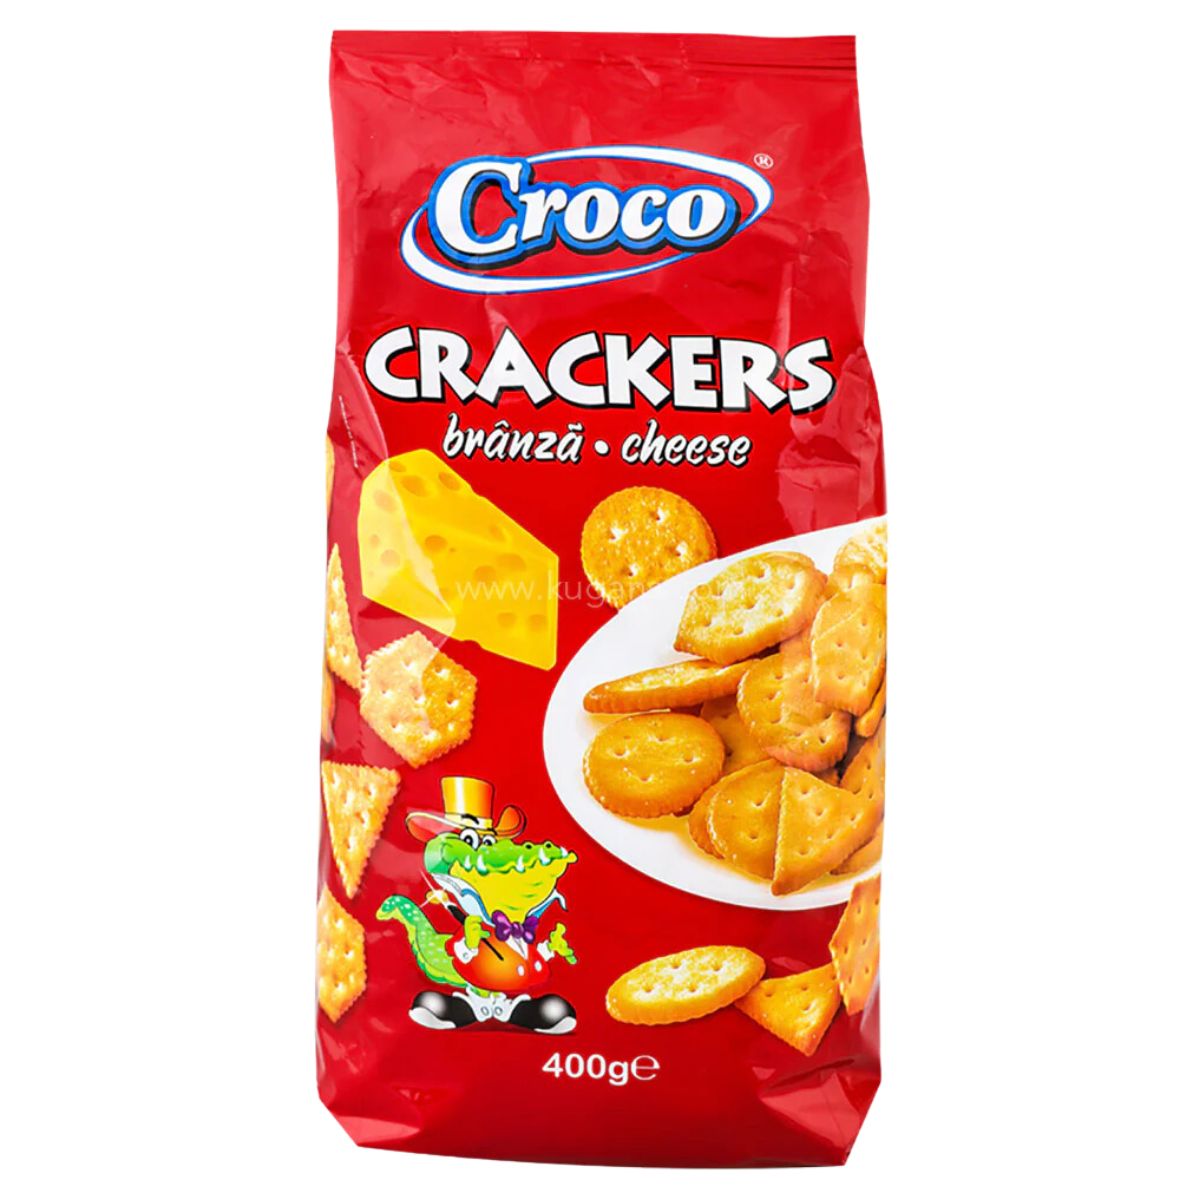 Croco - Crackers Cheese - 400g with cheddar cheese.